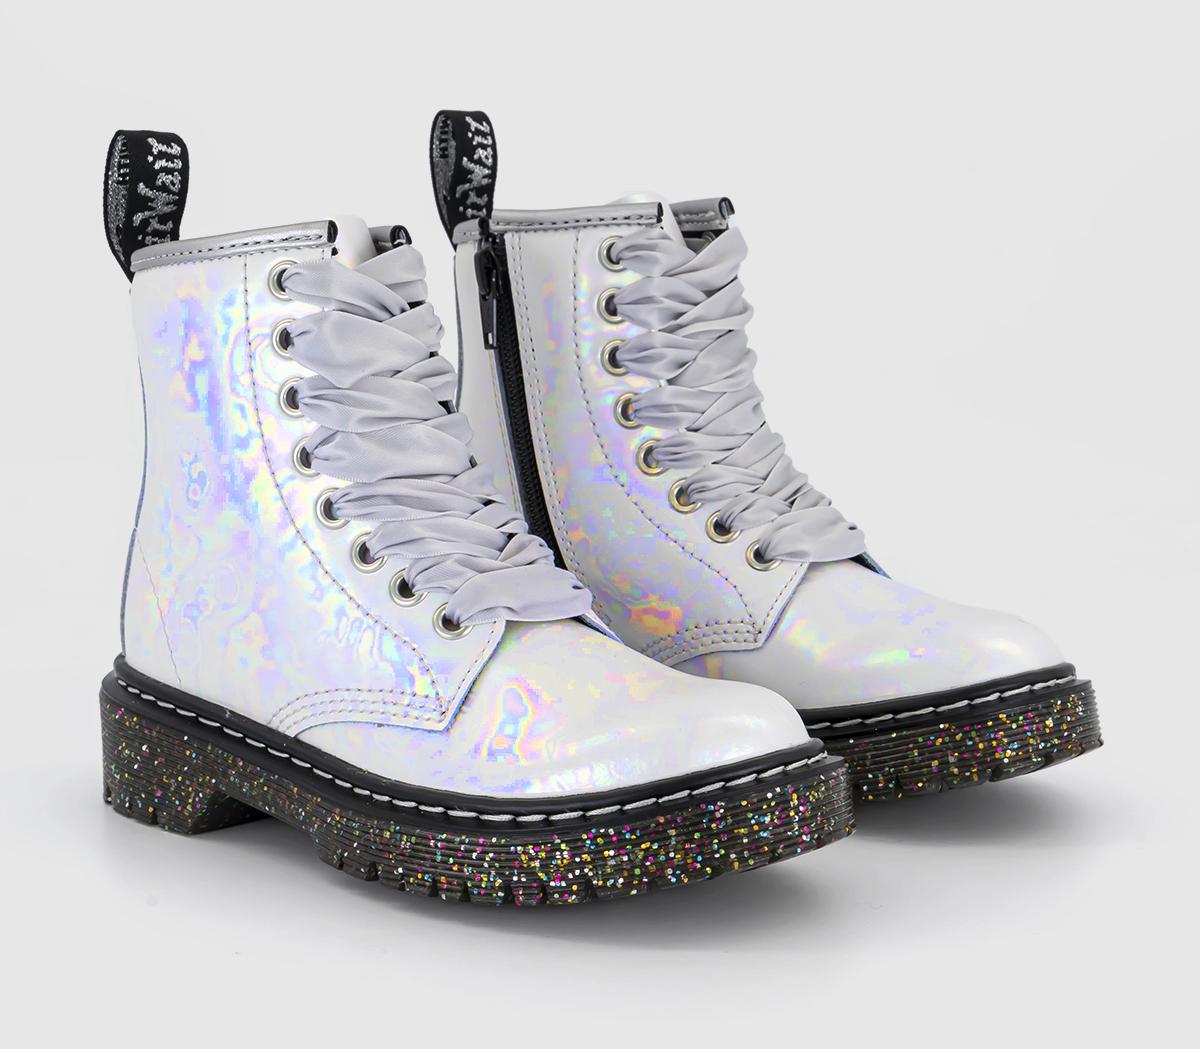 Dr. Martens 1460 Bex Junior Boots White Opalescent Shimmer, 1 Youth